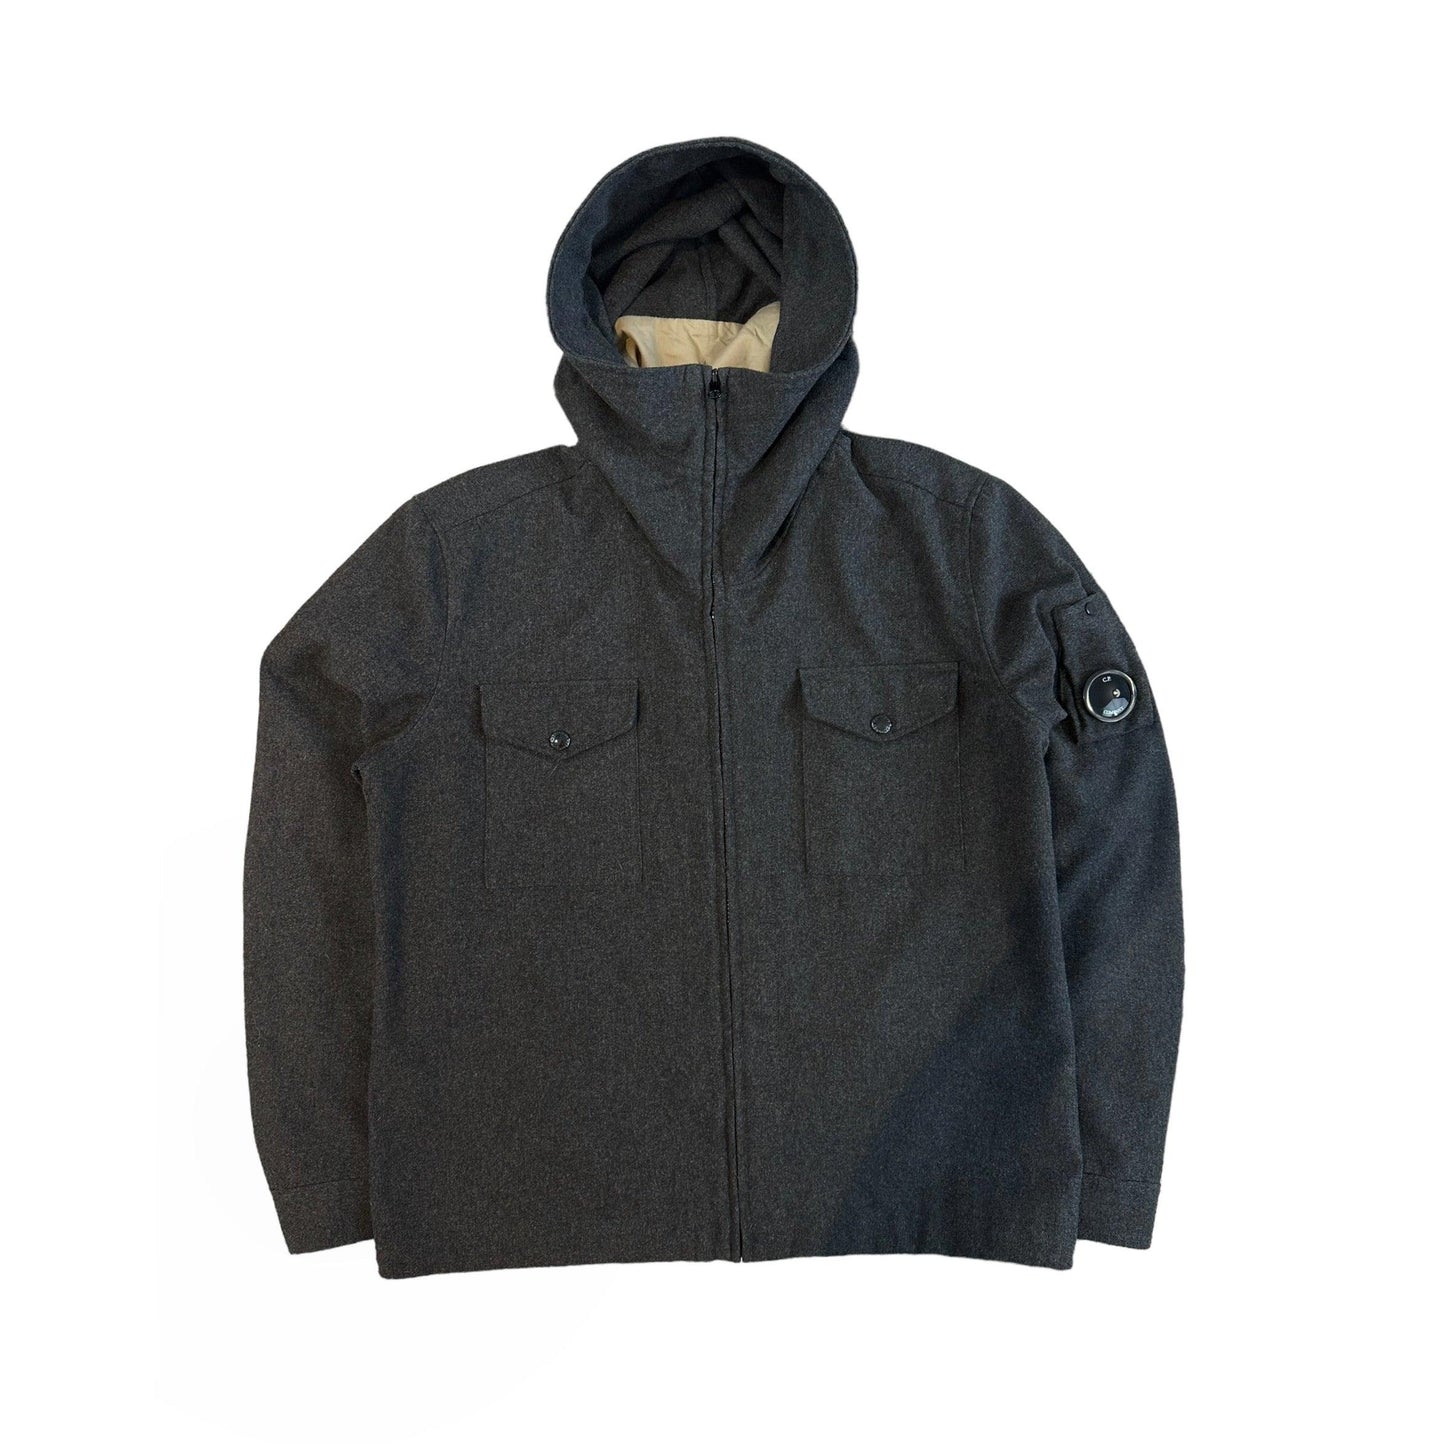 CP Company Wool Double Pocket Zip Up Jacket with Micro Lens - Known Source